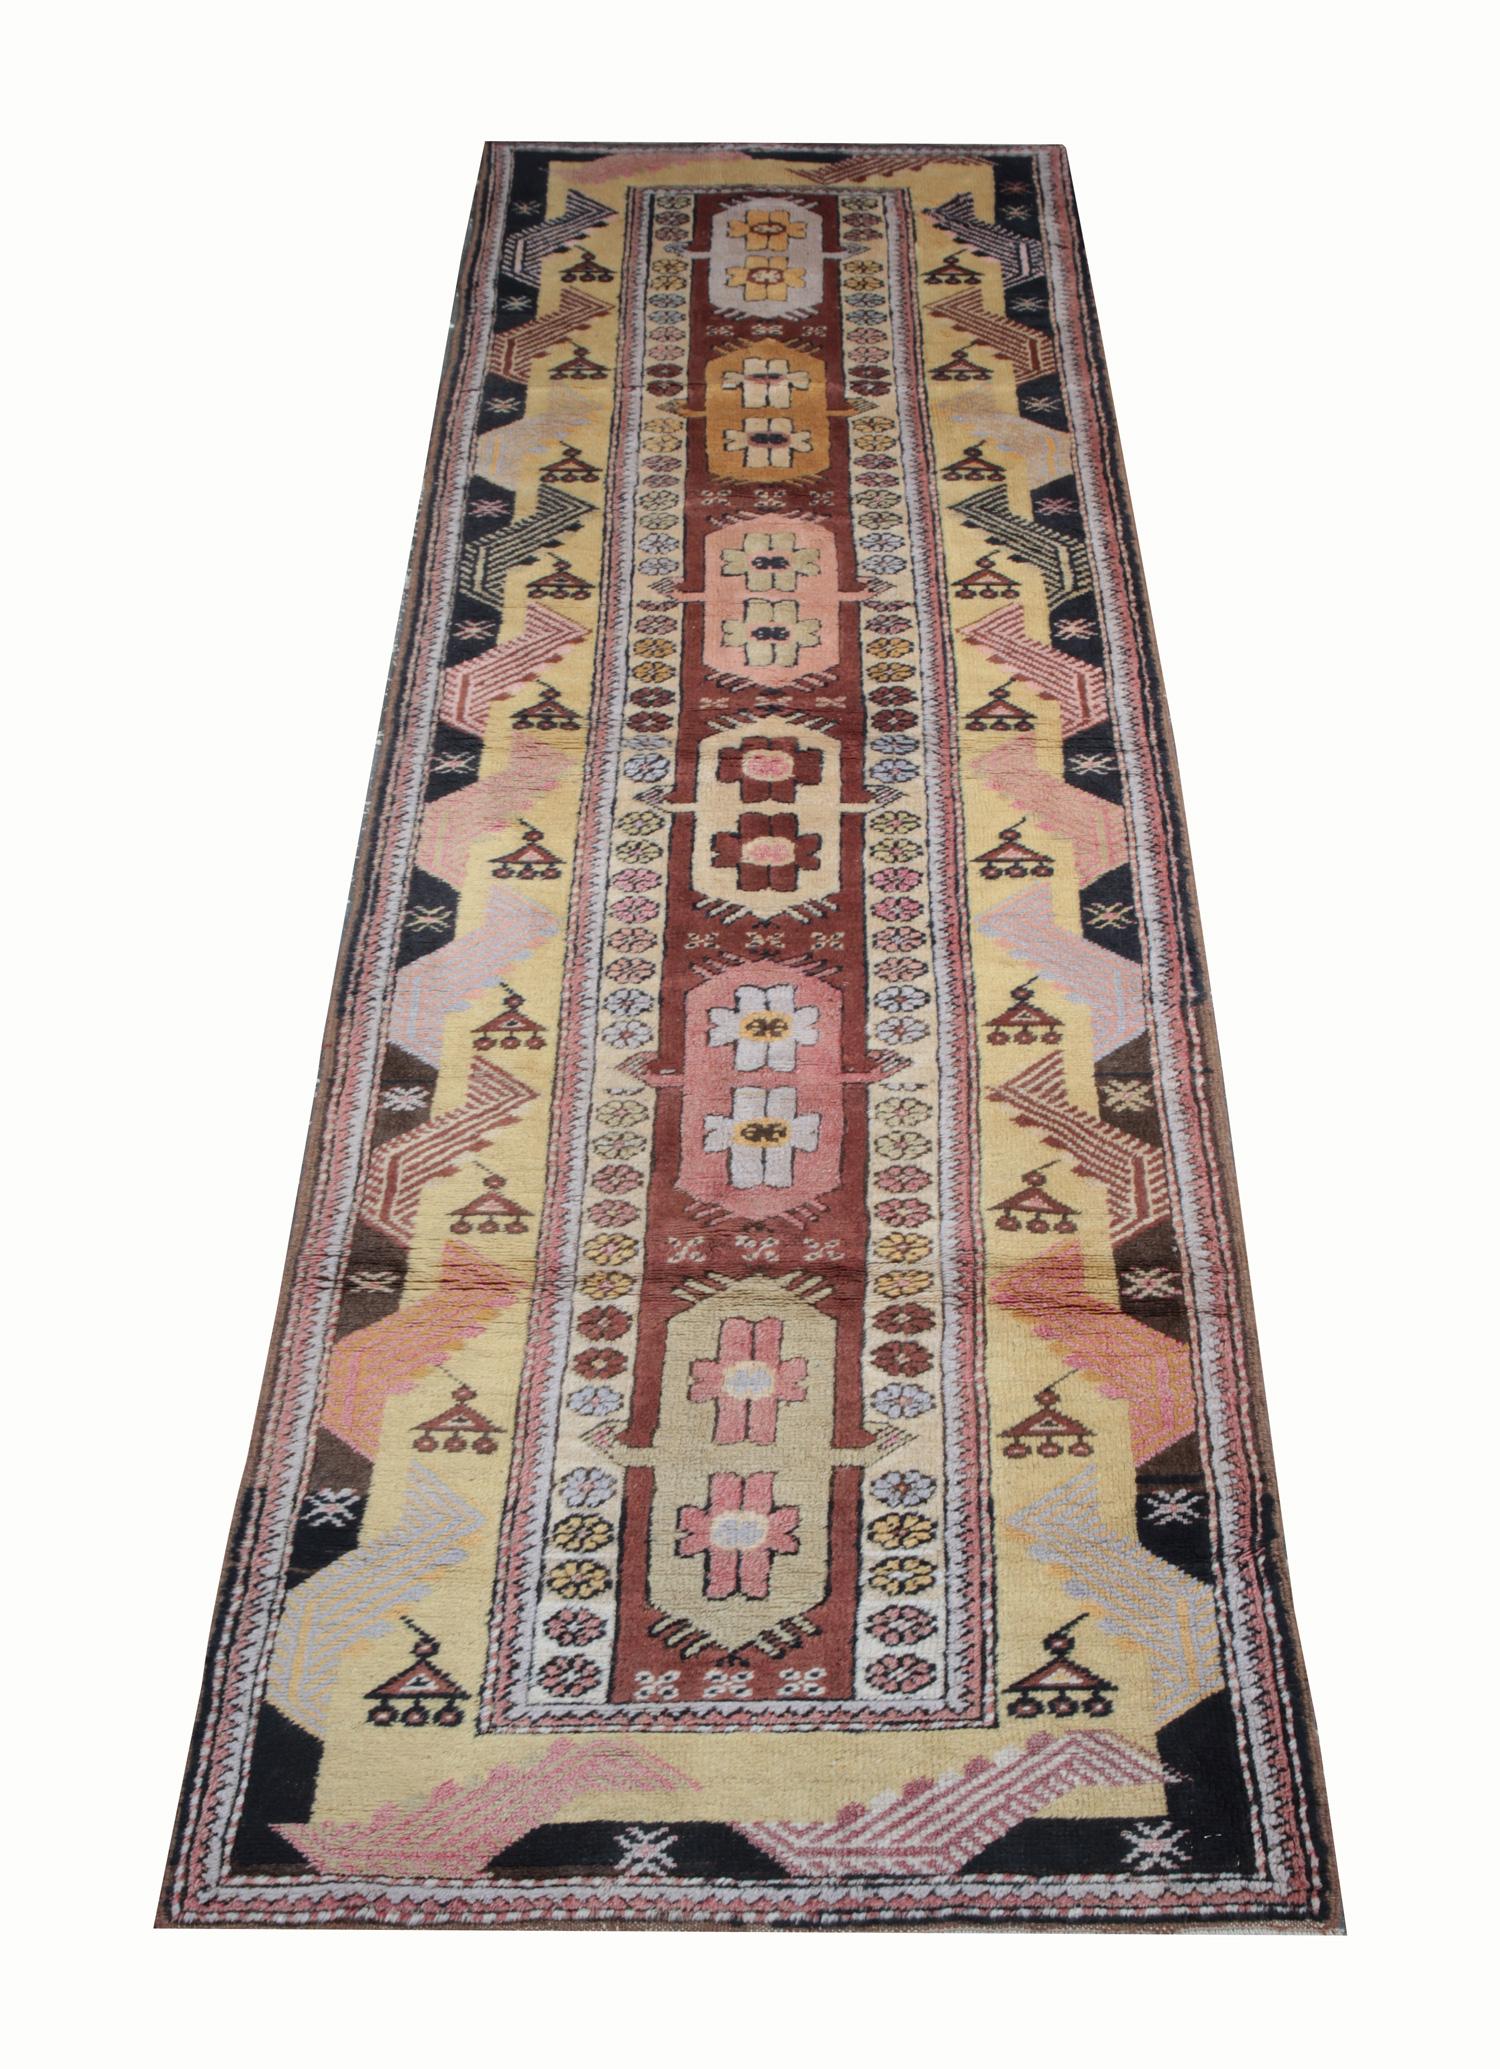 This antique Milas carpet runner has a multi-medallion design with earthy hues of brown, gold and rust red and a rich palette of colours. Featuring geometric rug design similar to those of Caucasian provenance combined with floral rug motifs inside